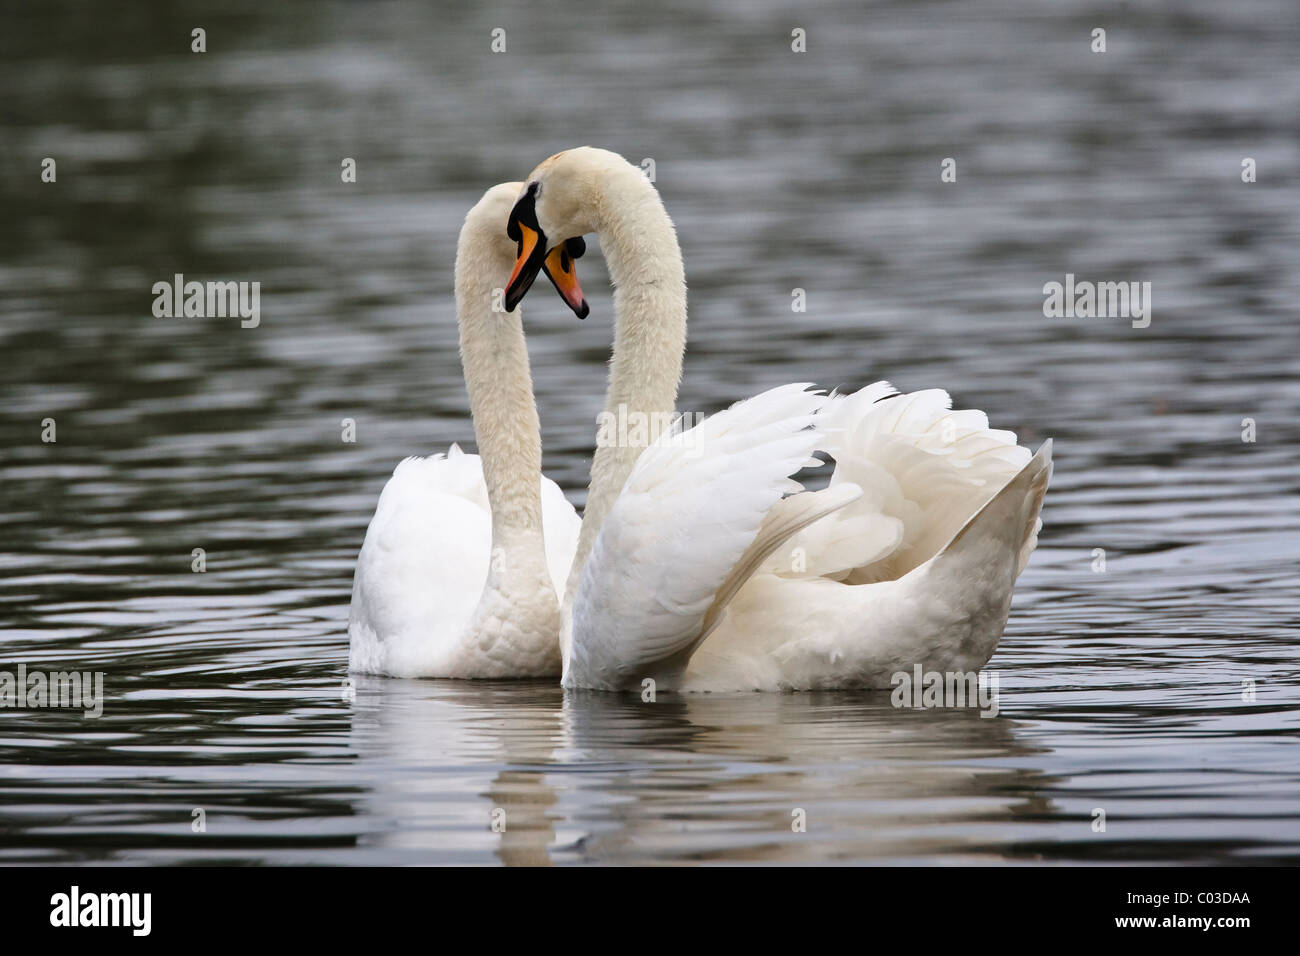 Mute swans in courtship pairing with the pair forming a heart shape Stock Photo